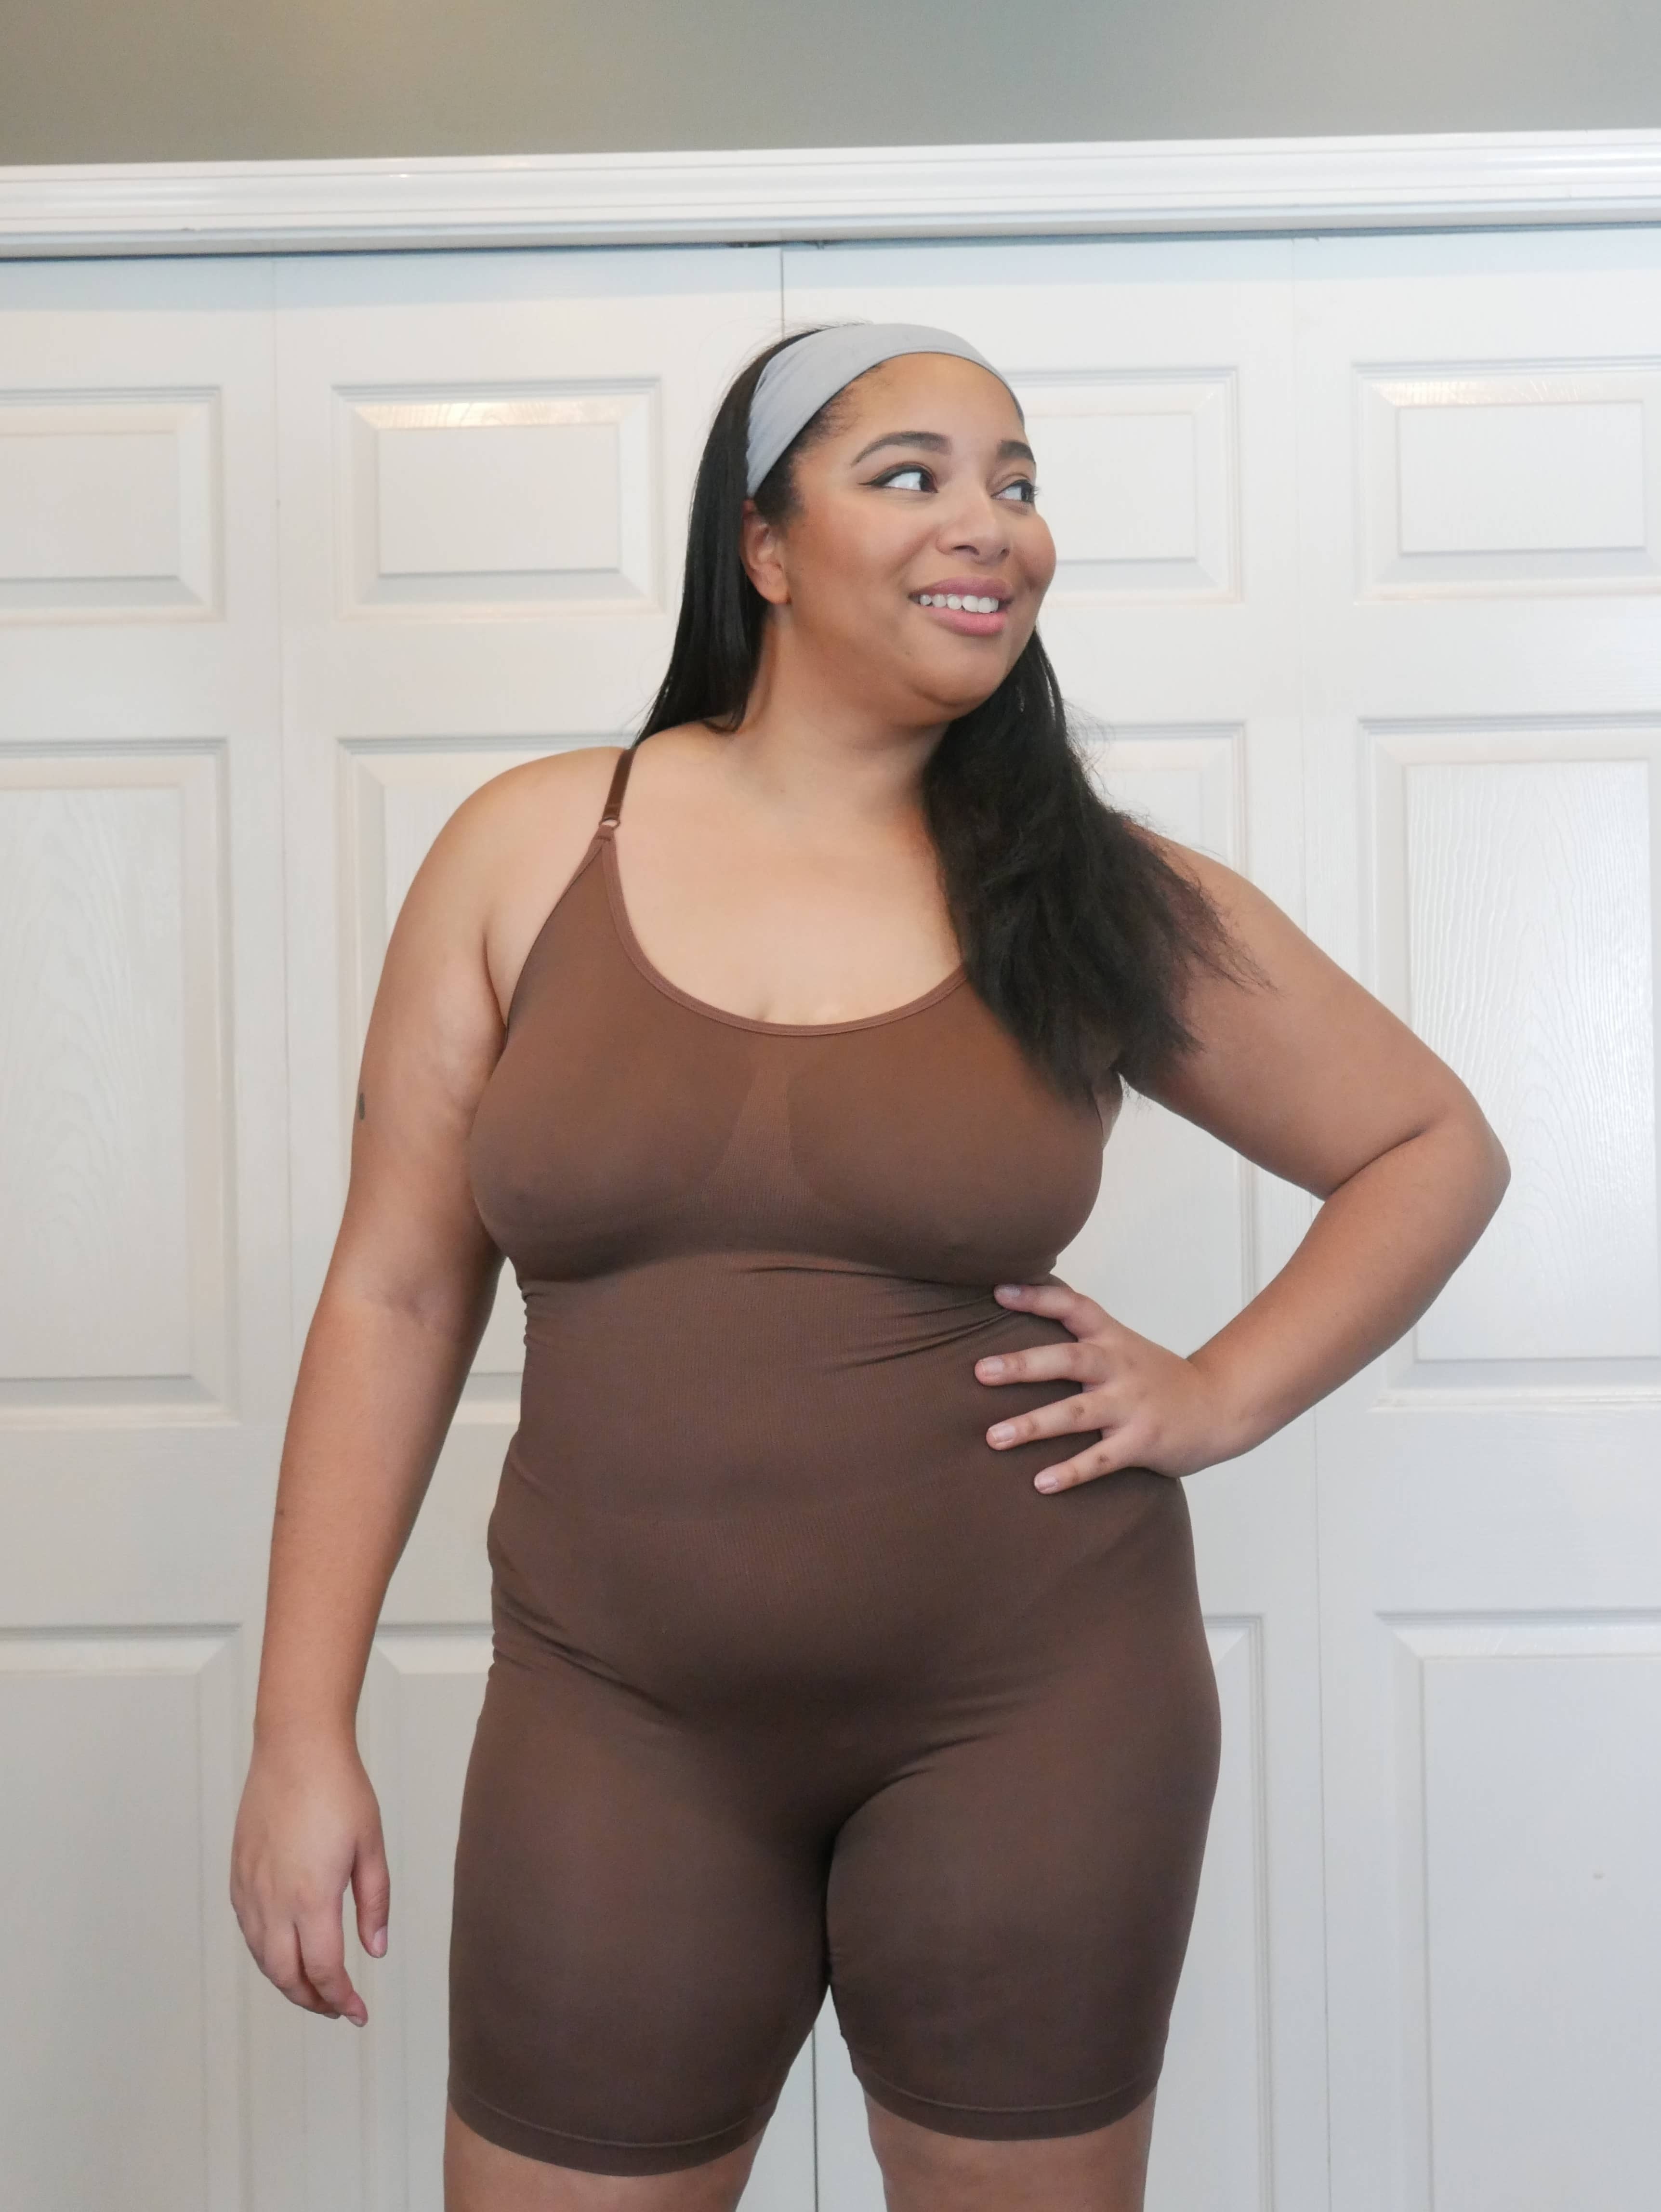 Snatch your confidence and curves with our Snatched Shapewear Bodysuit. Get  ready to embrace your best self! 💃✨ #HeyShapeSnatched #C